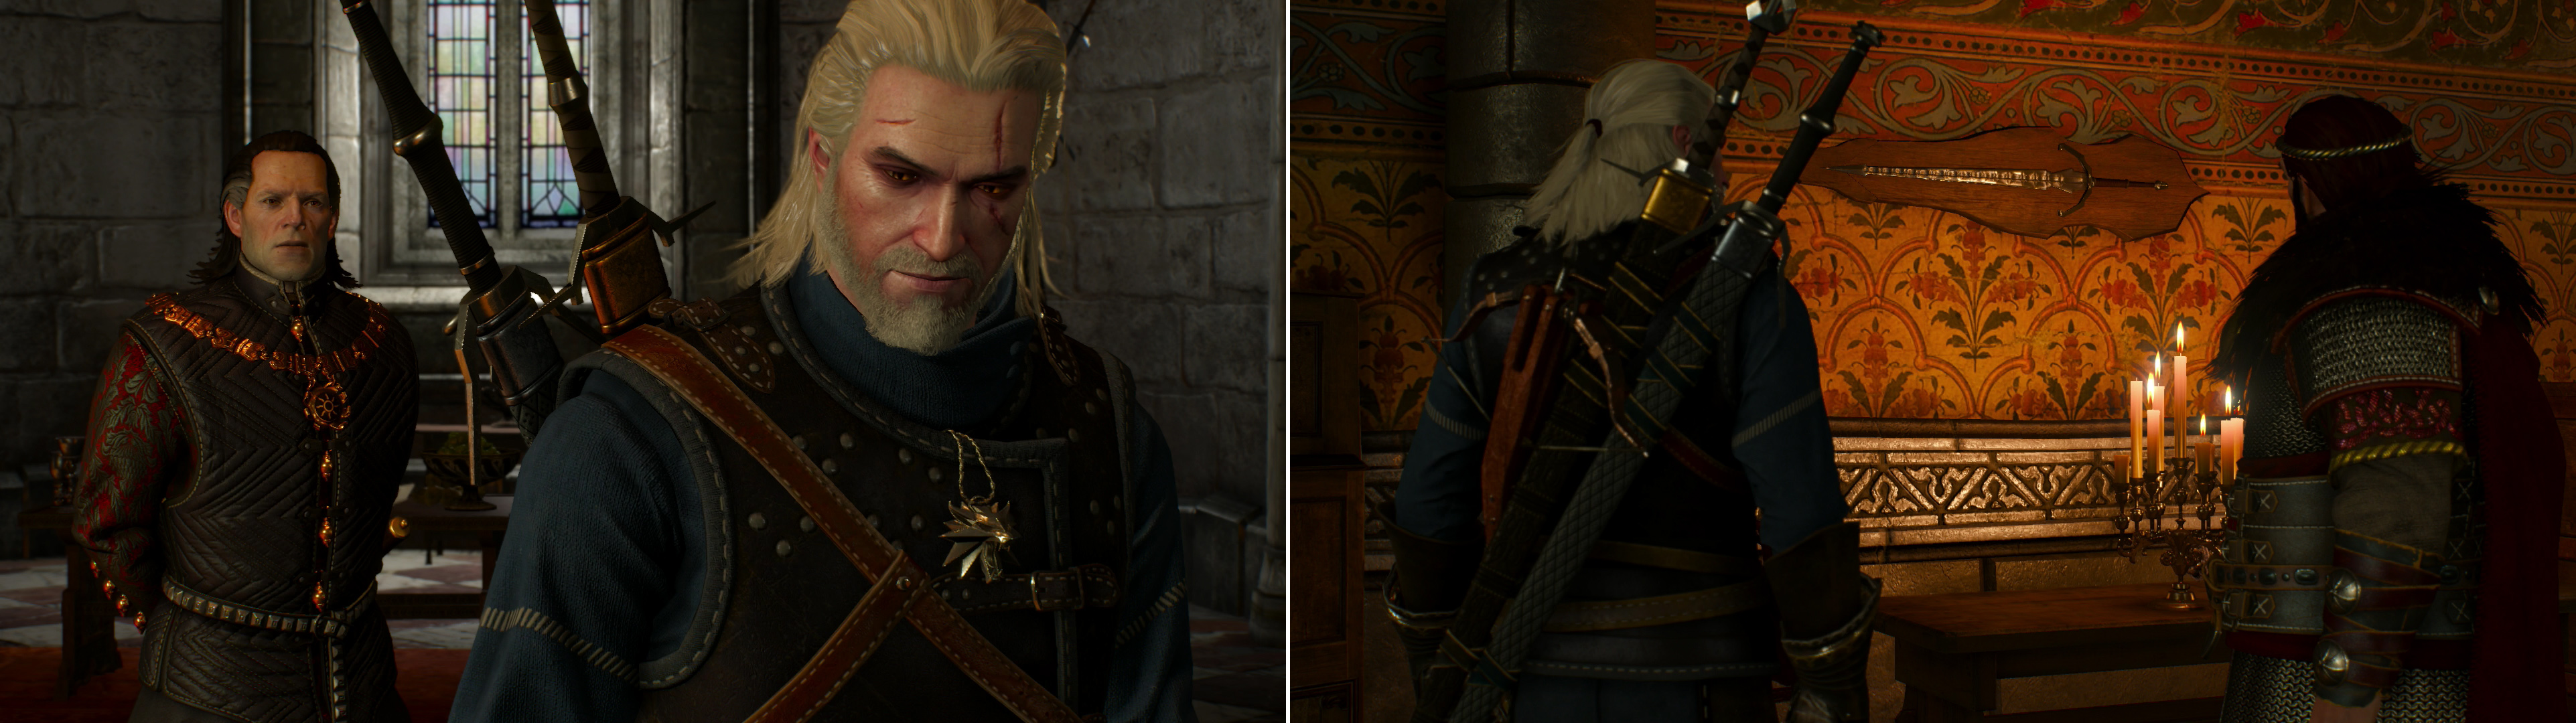 As battle with the Wild Hunt looms, Geralt must seek aid from various sources. Some are considerably less helpful than their resources would otherwise allow (left) while other go above and beyond (right).